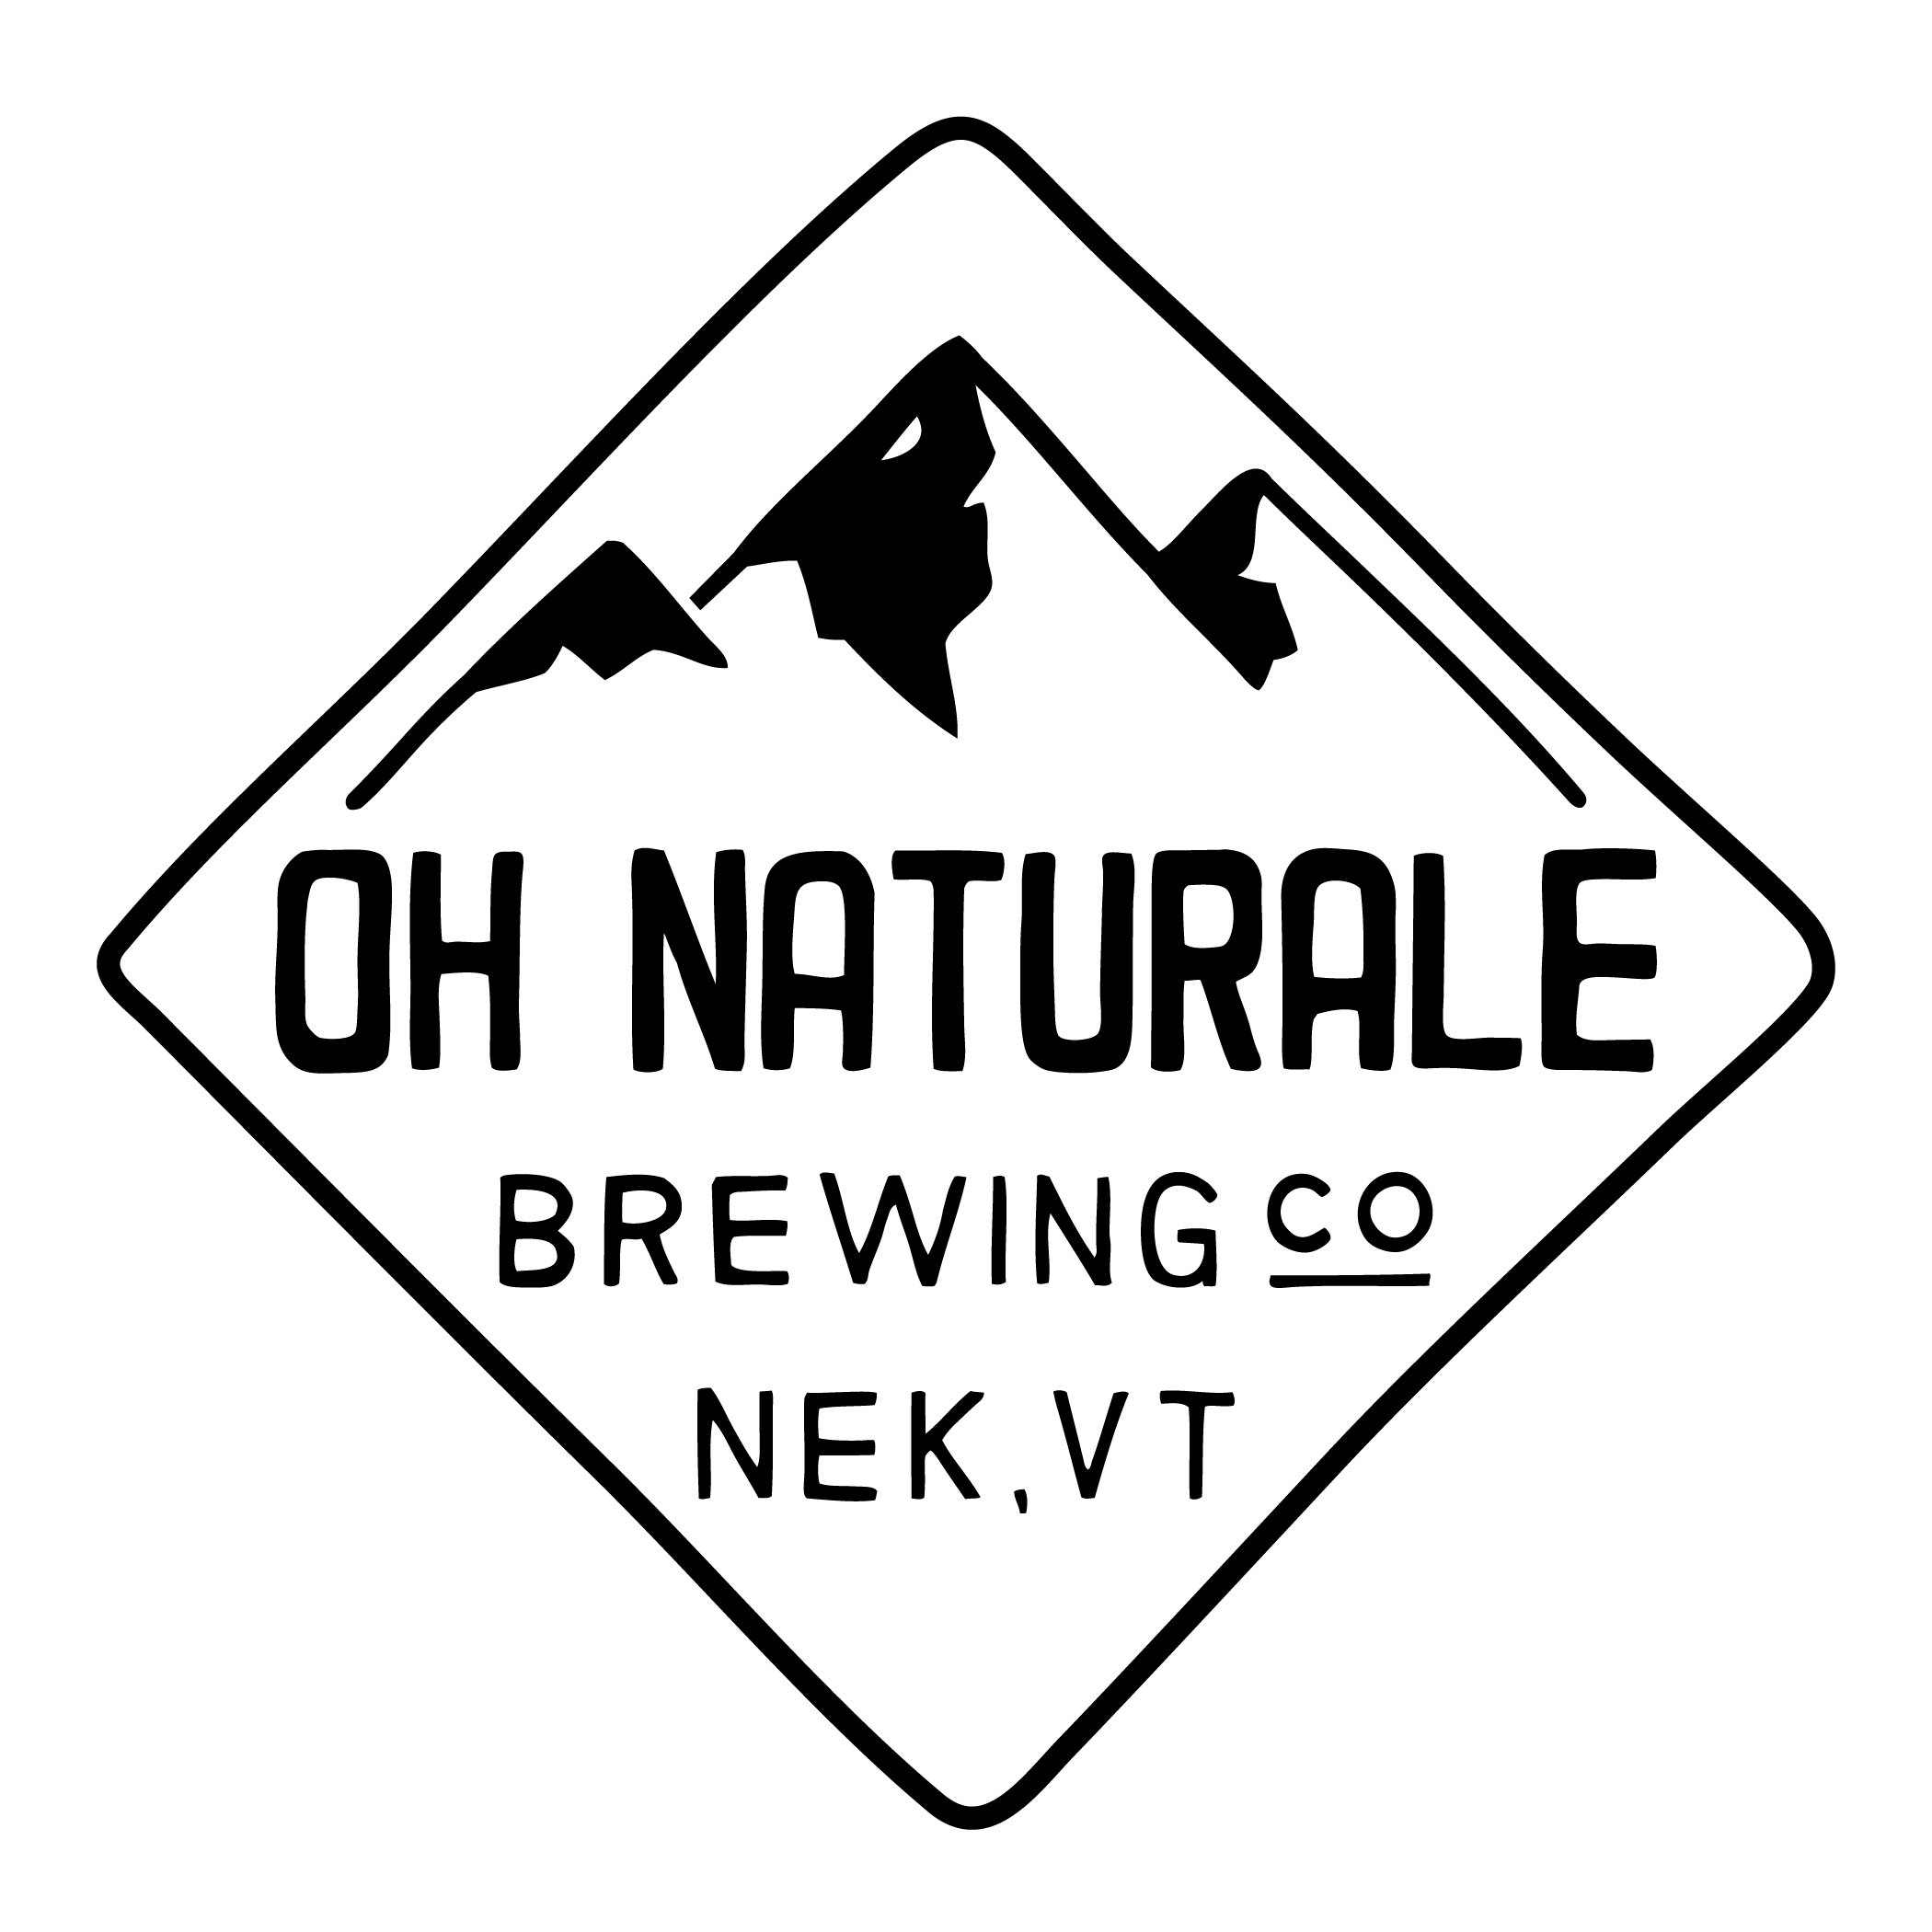 Oh Naturale Brewing Logo